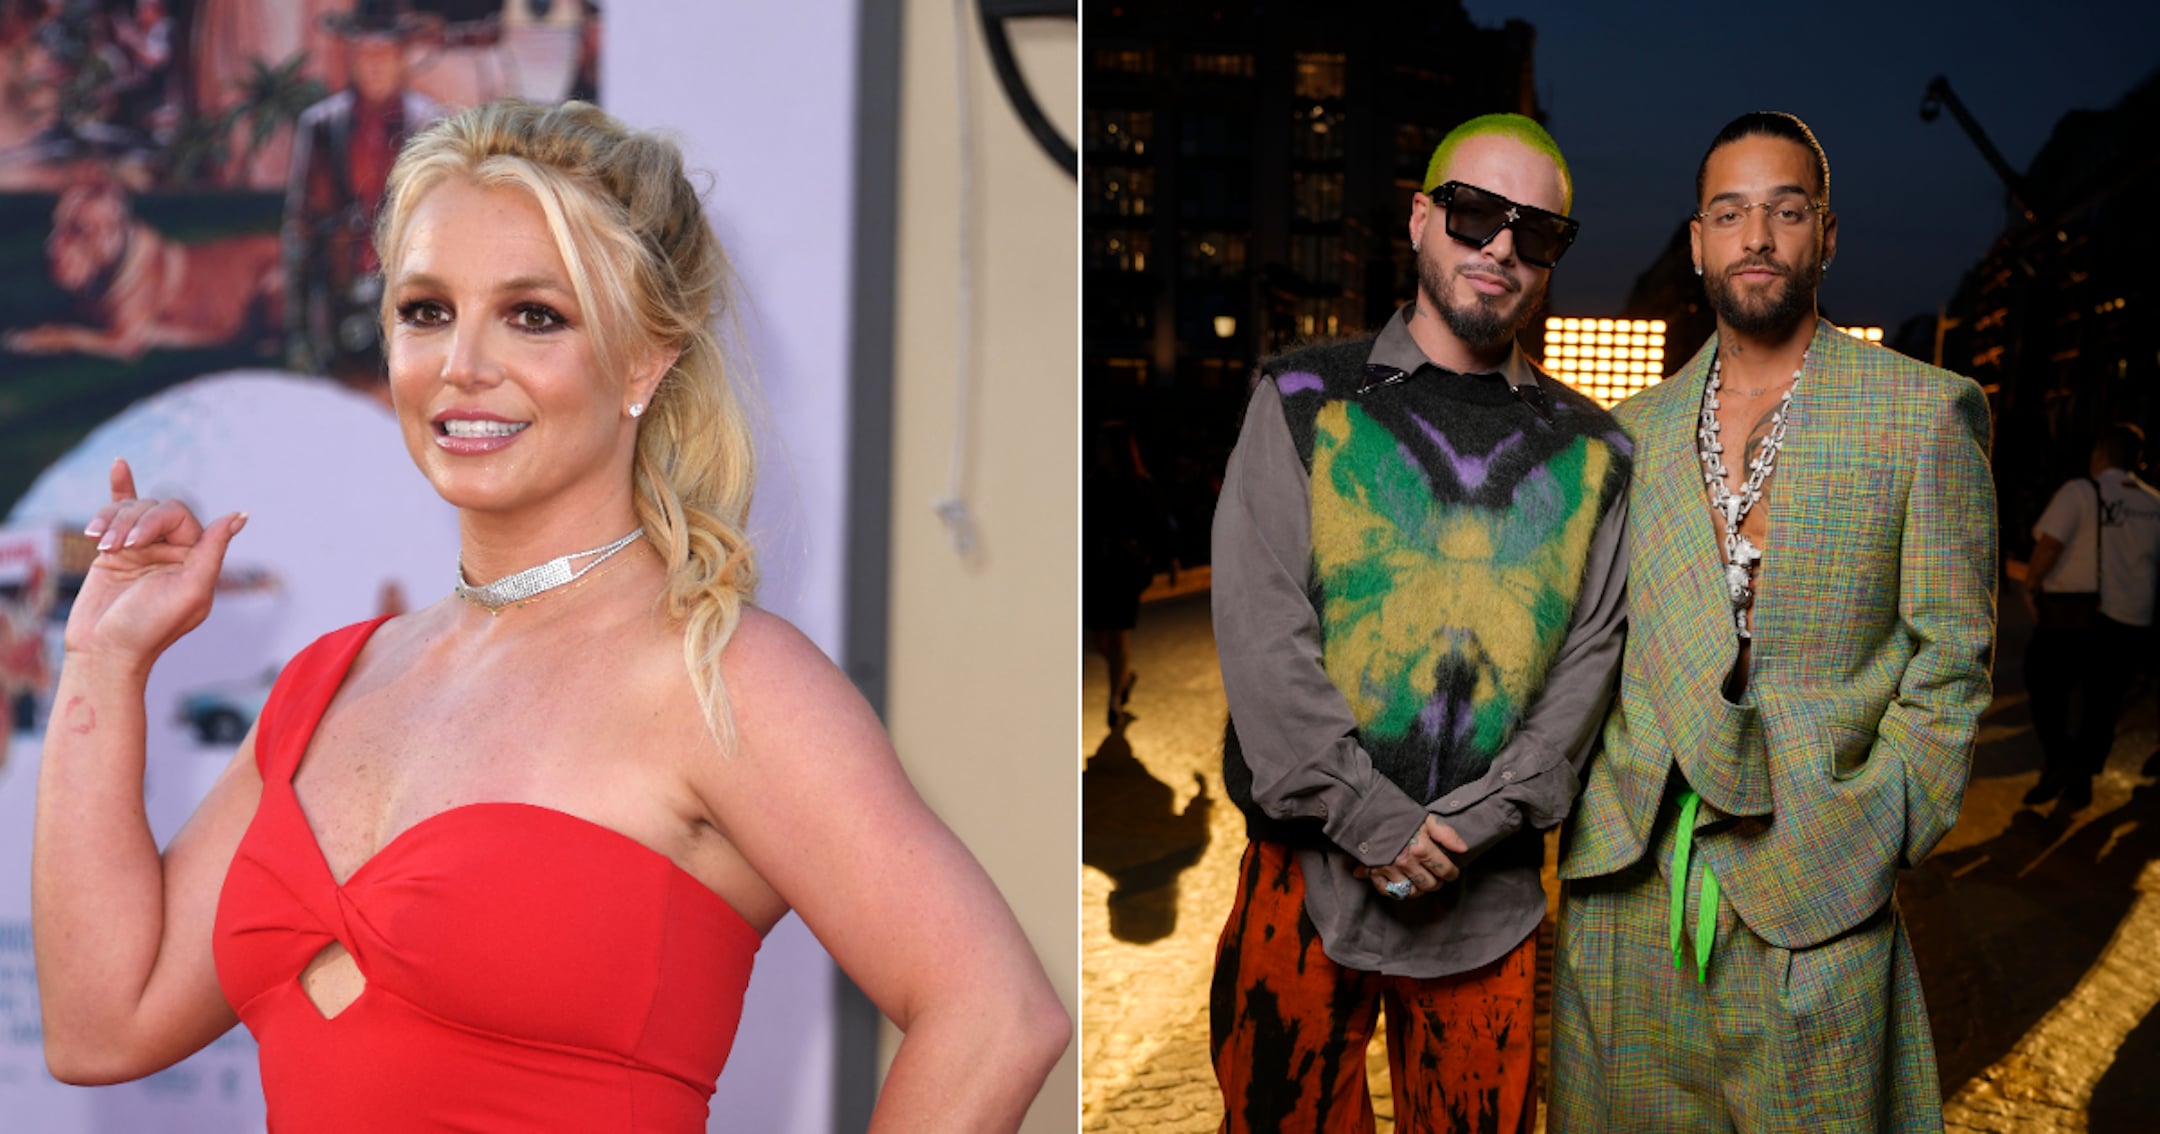 Britney Spears, Maluma and J Balvin Hang Out in New Photo